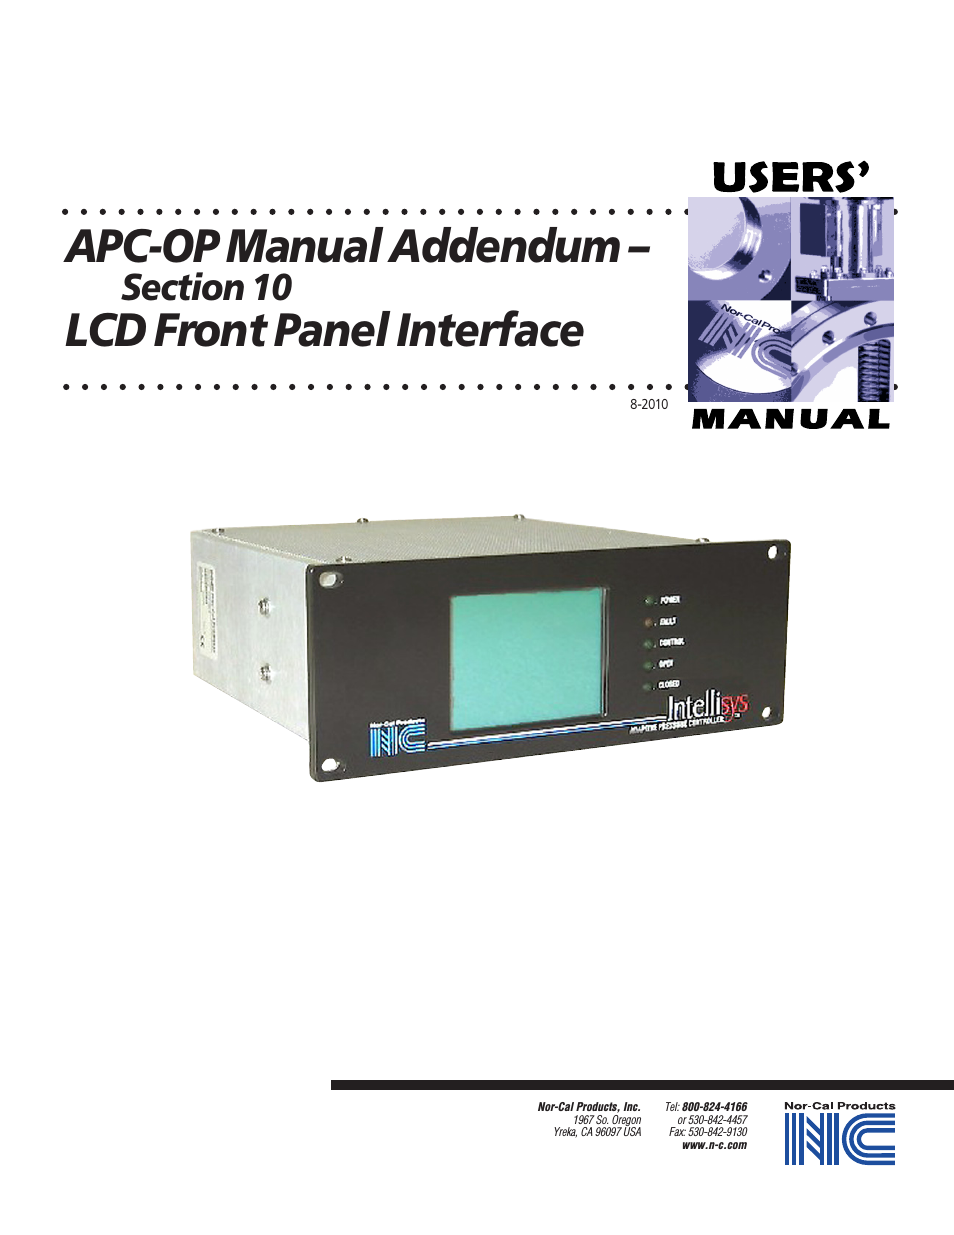 LCD Front Panel Interface